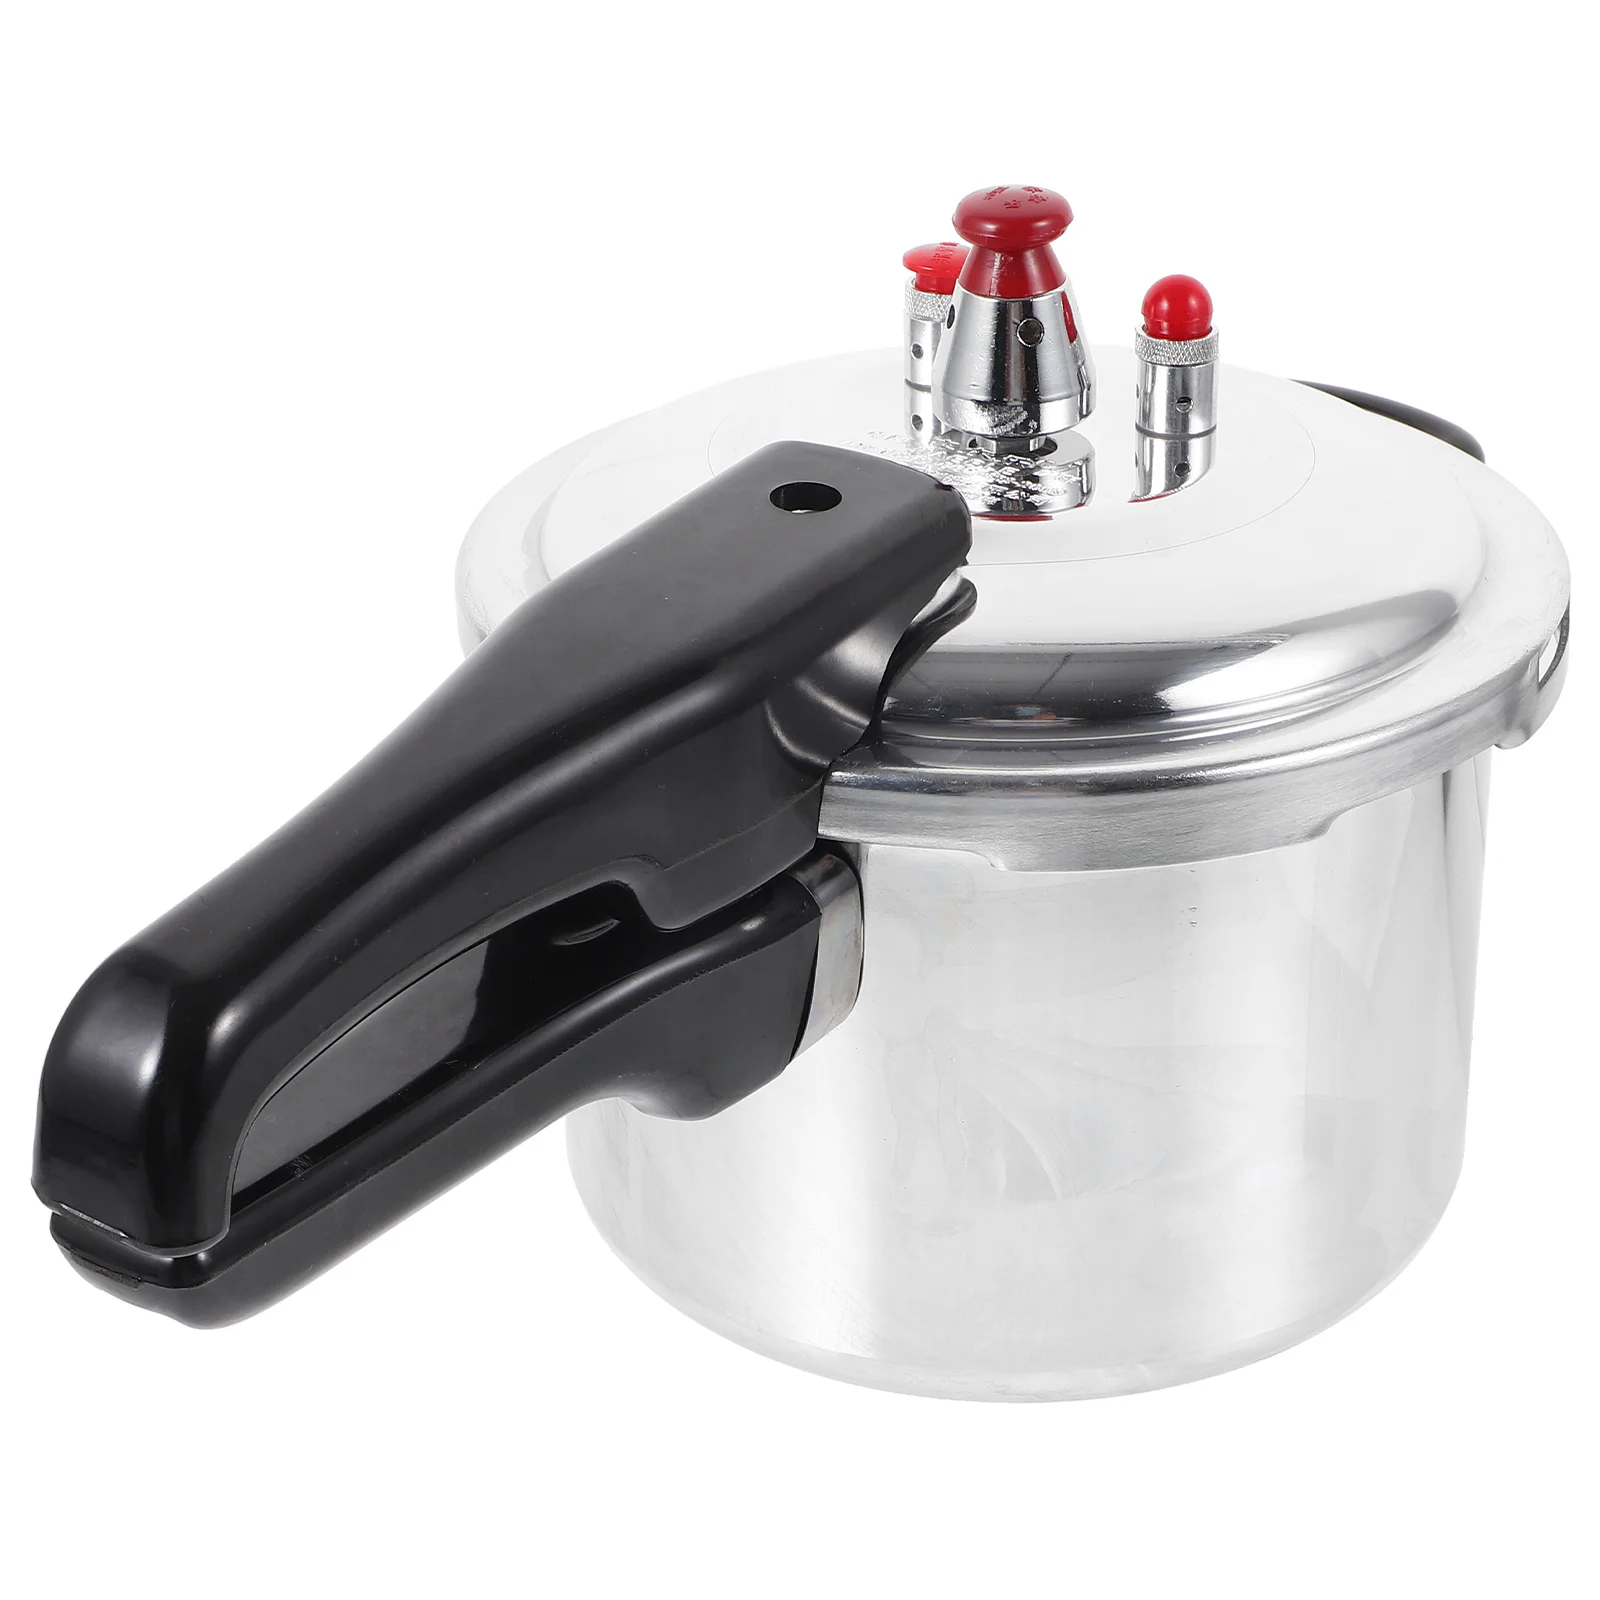 

Pressure Cooker High Gas Stove Stovetop Induction Pot Small Aluminum Alloy Cookers